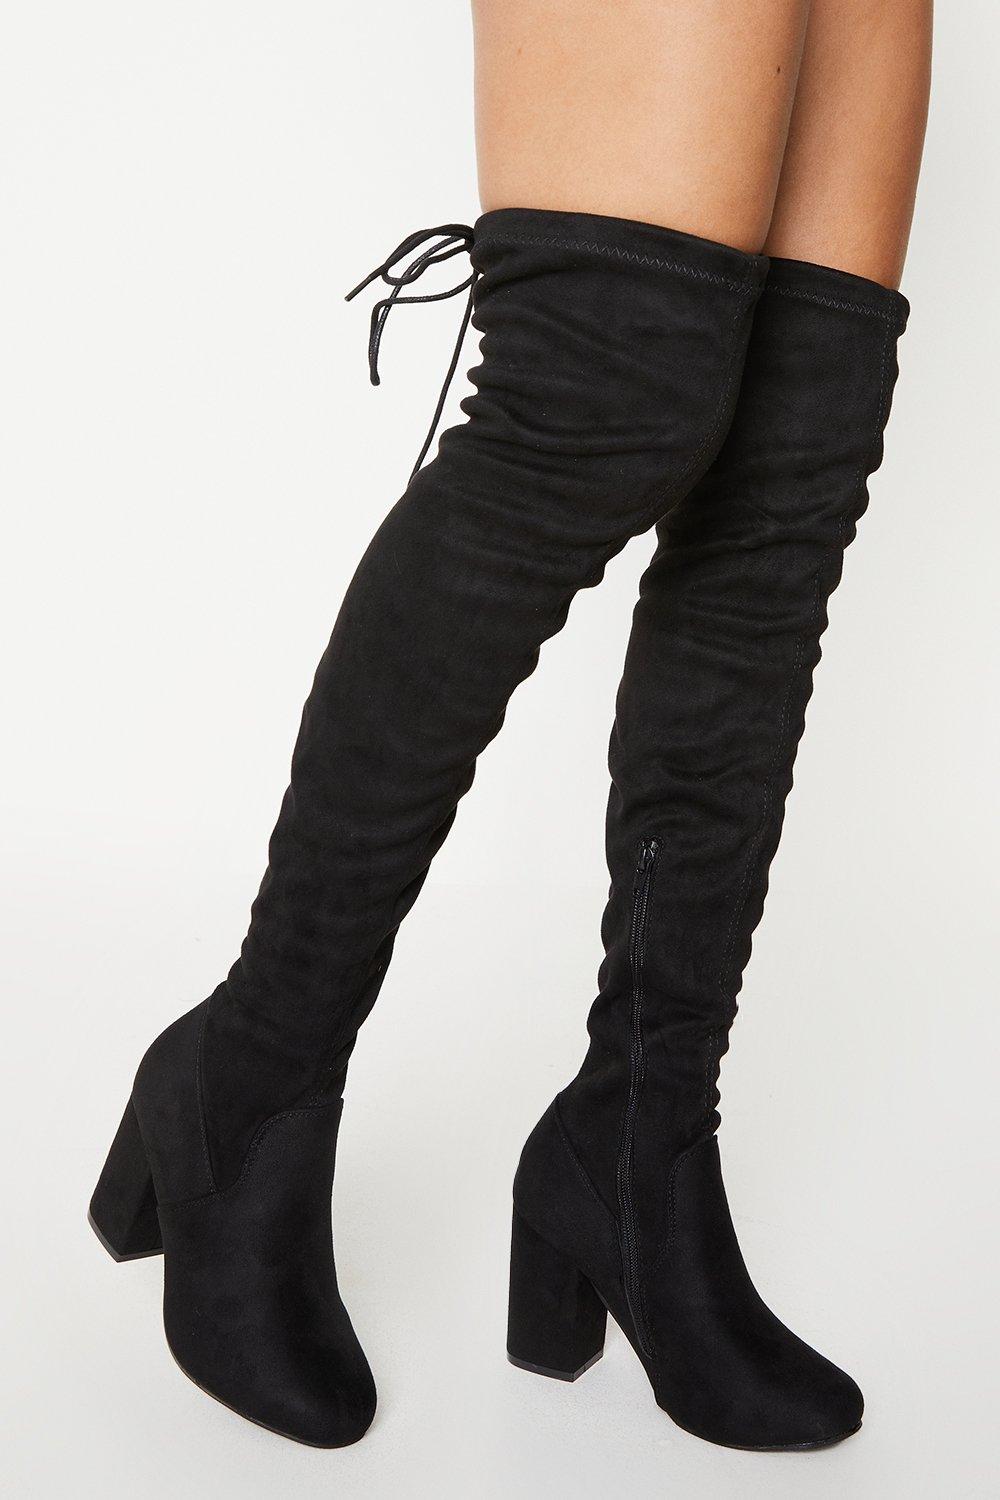 Women’s Wide Fit Krissy Over The Knee Boots - natural black - 5